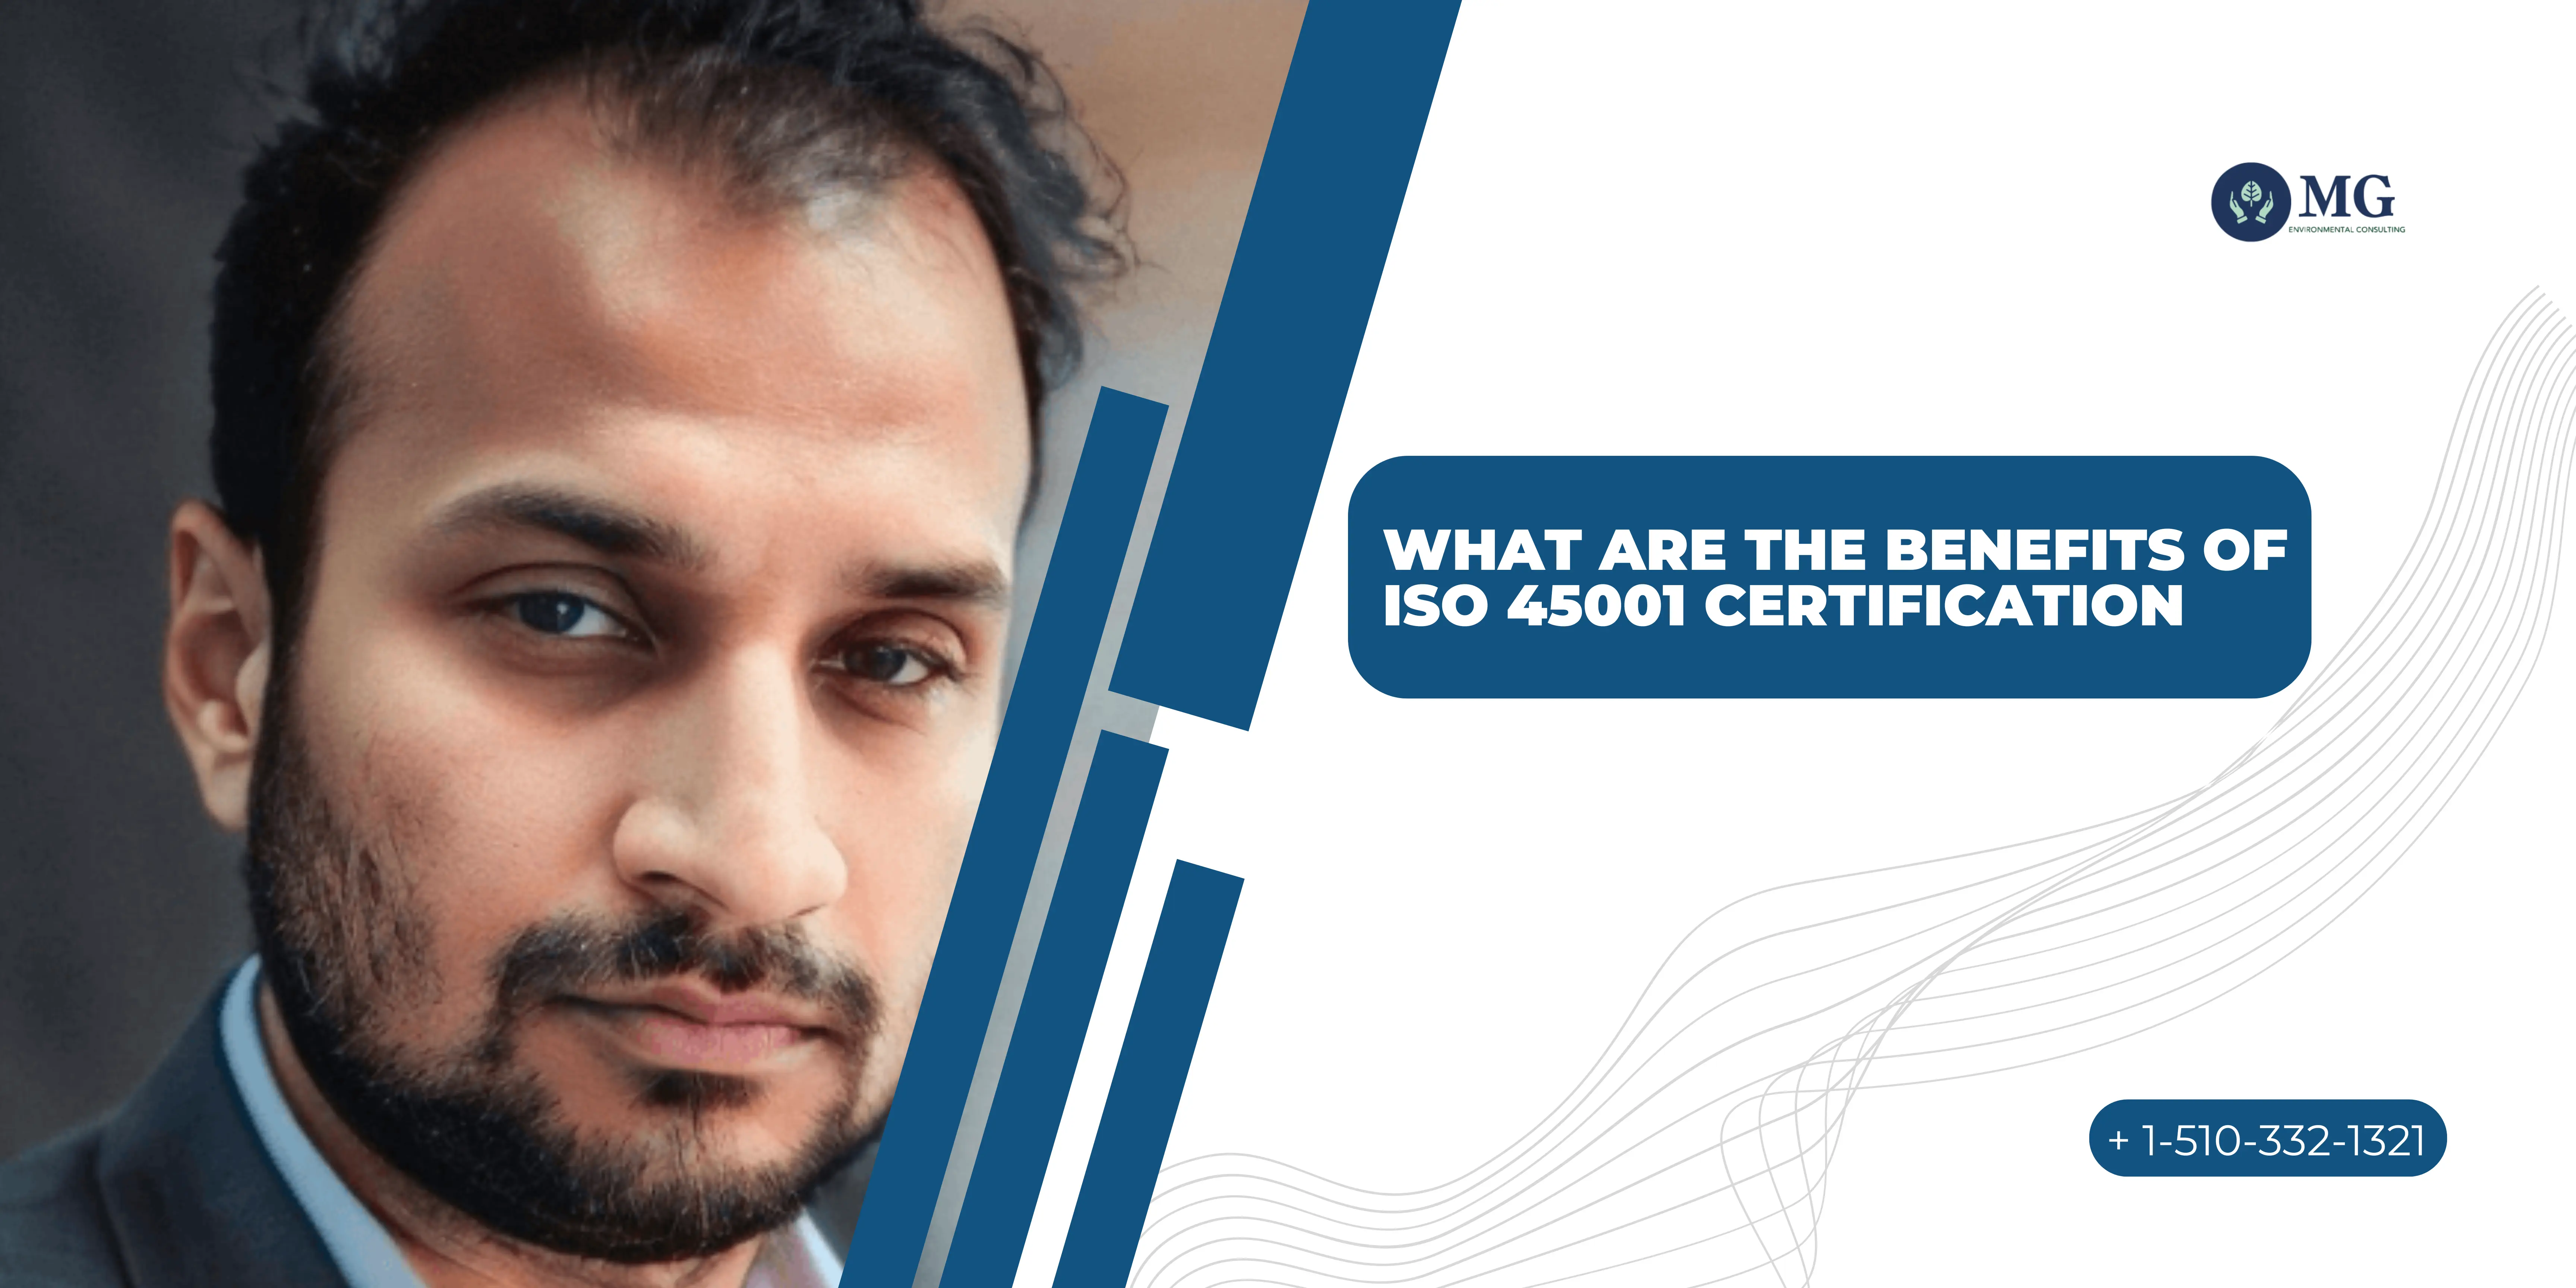 What are The Benefits of ISO 45001 Certification?